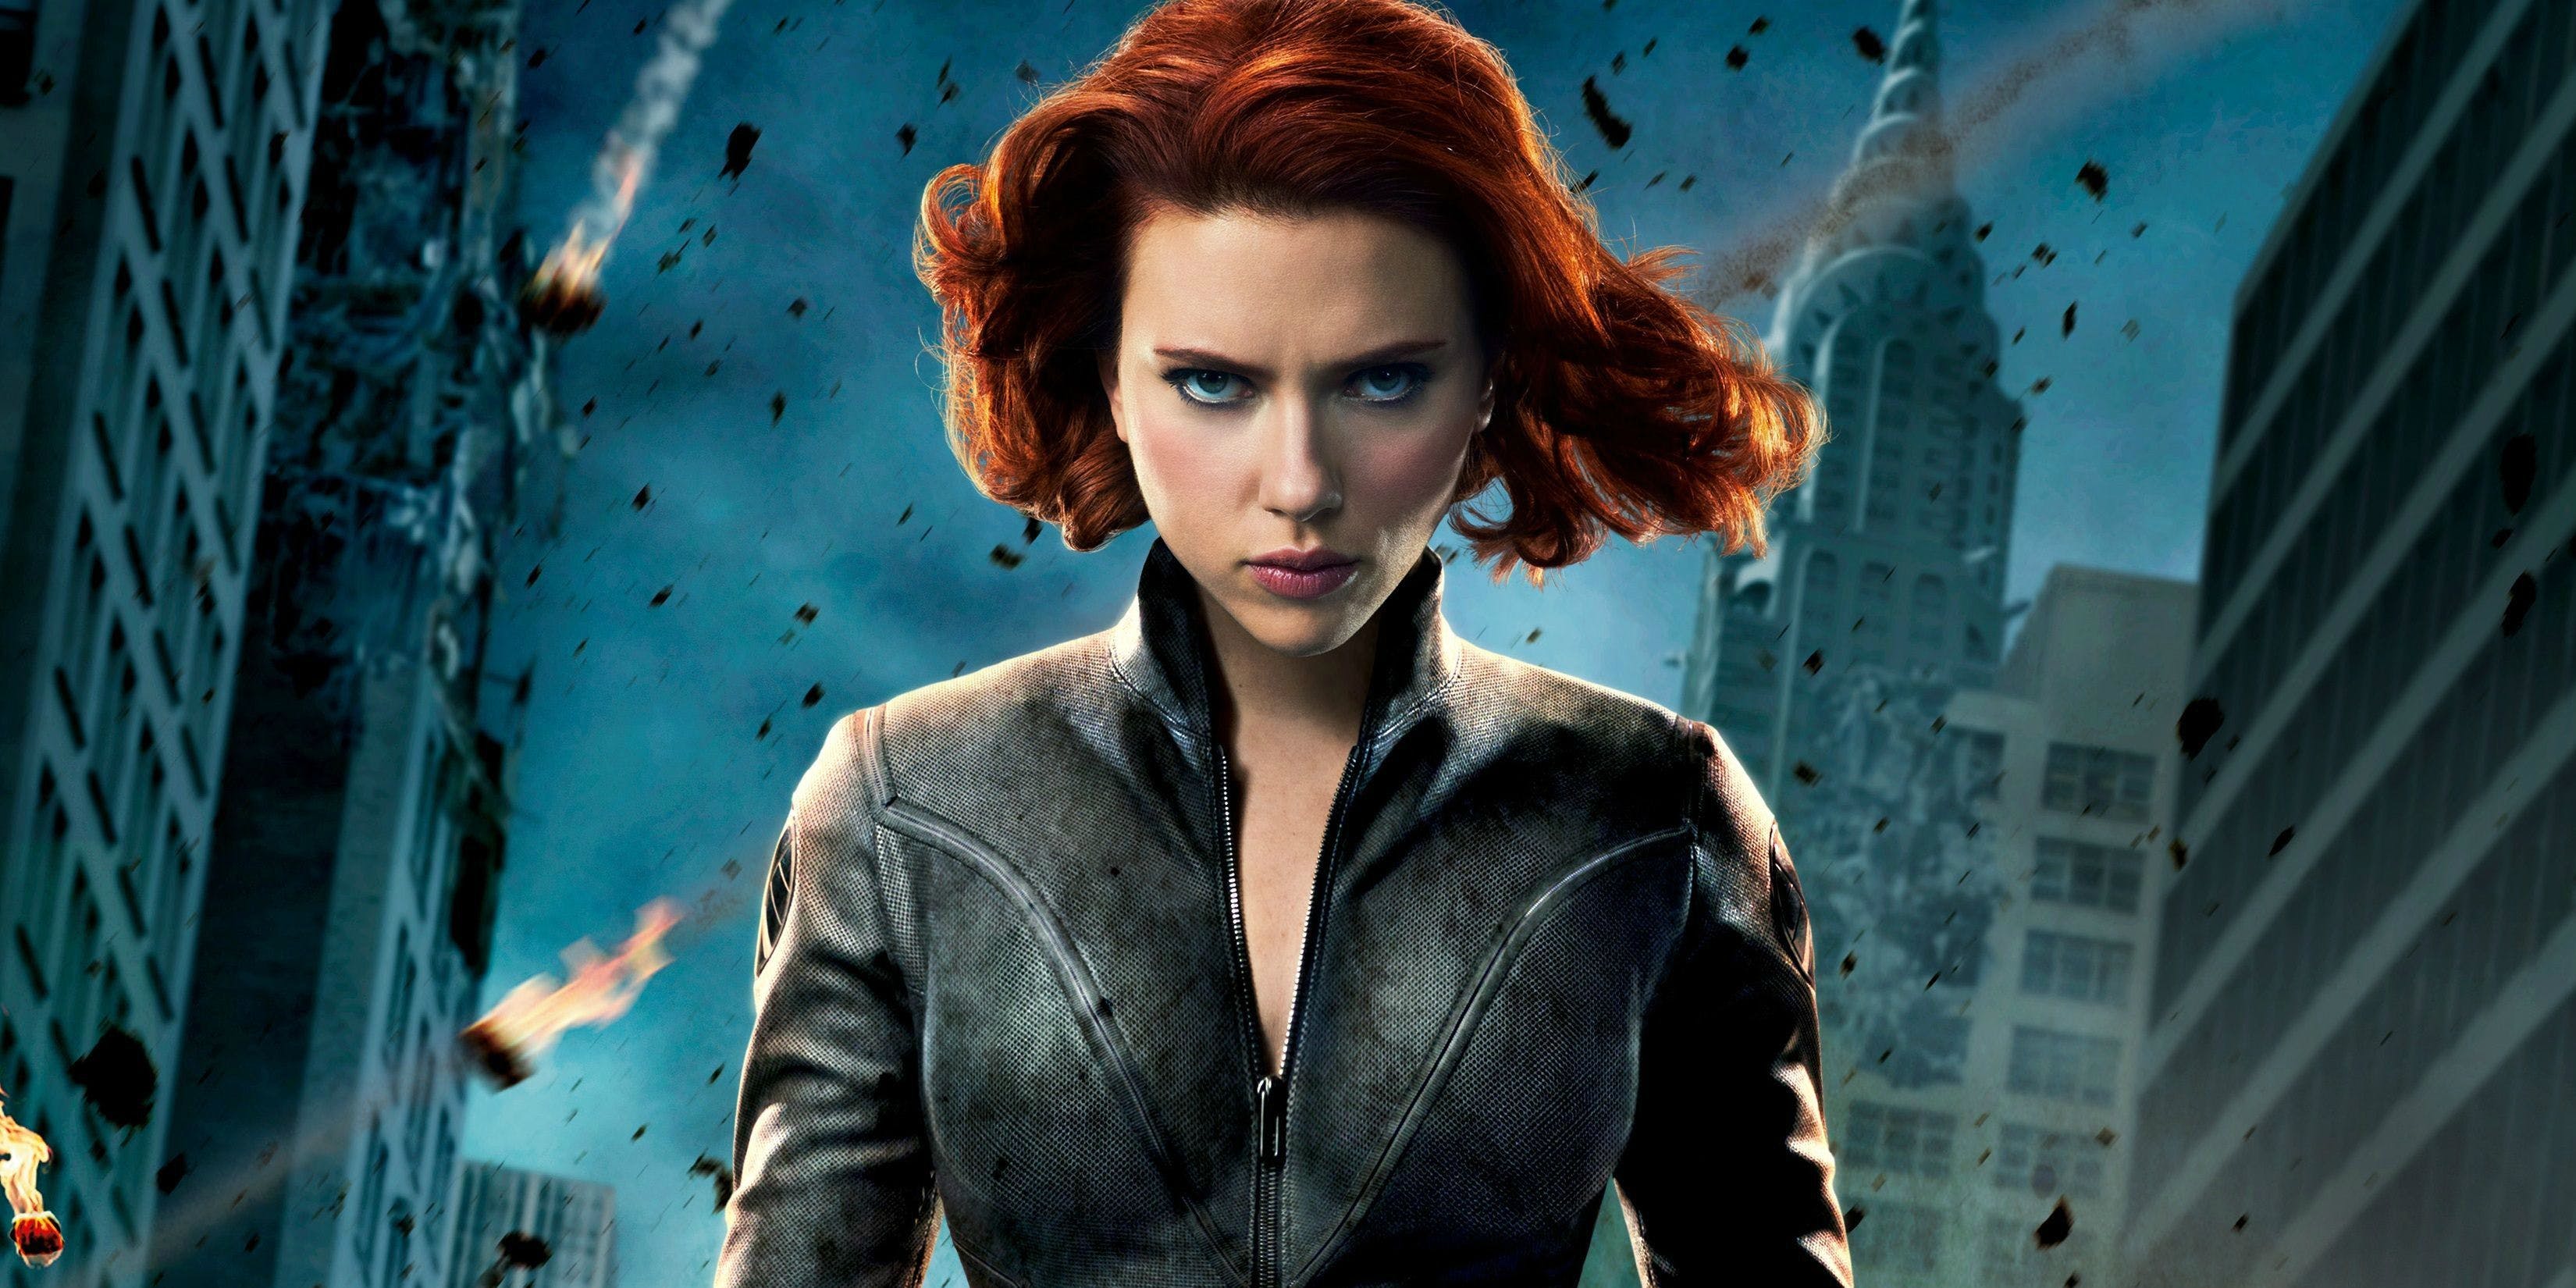 Marvel Meeting With Female Directors for Black Widow | ScreenRant